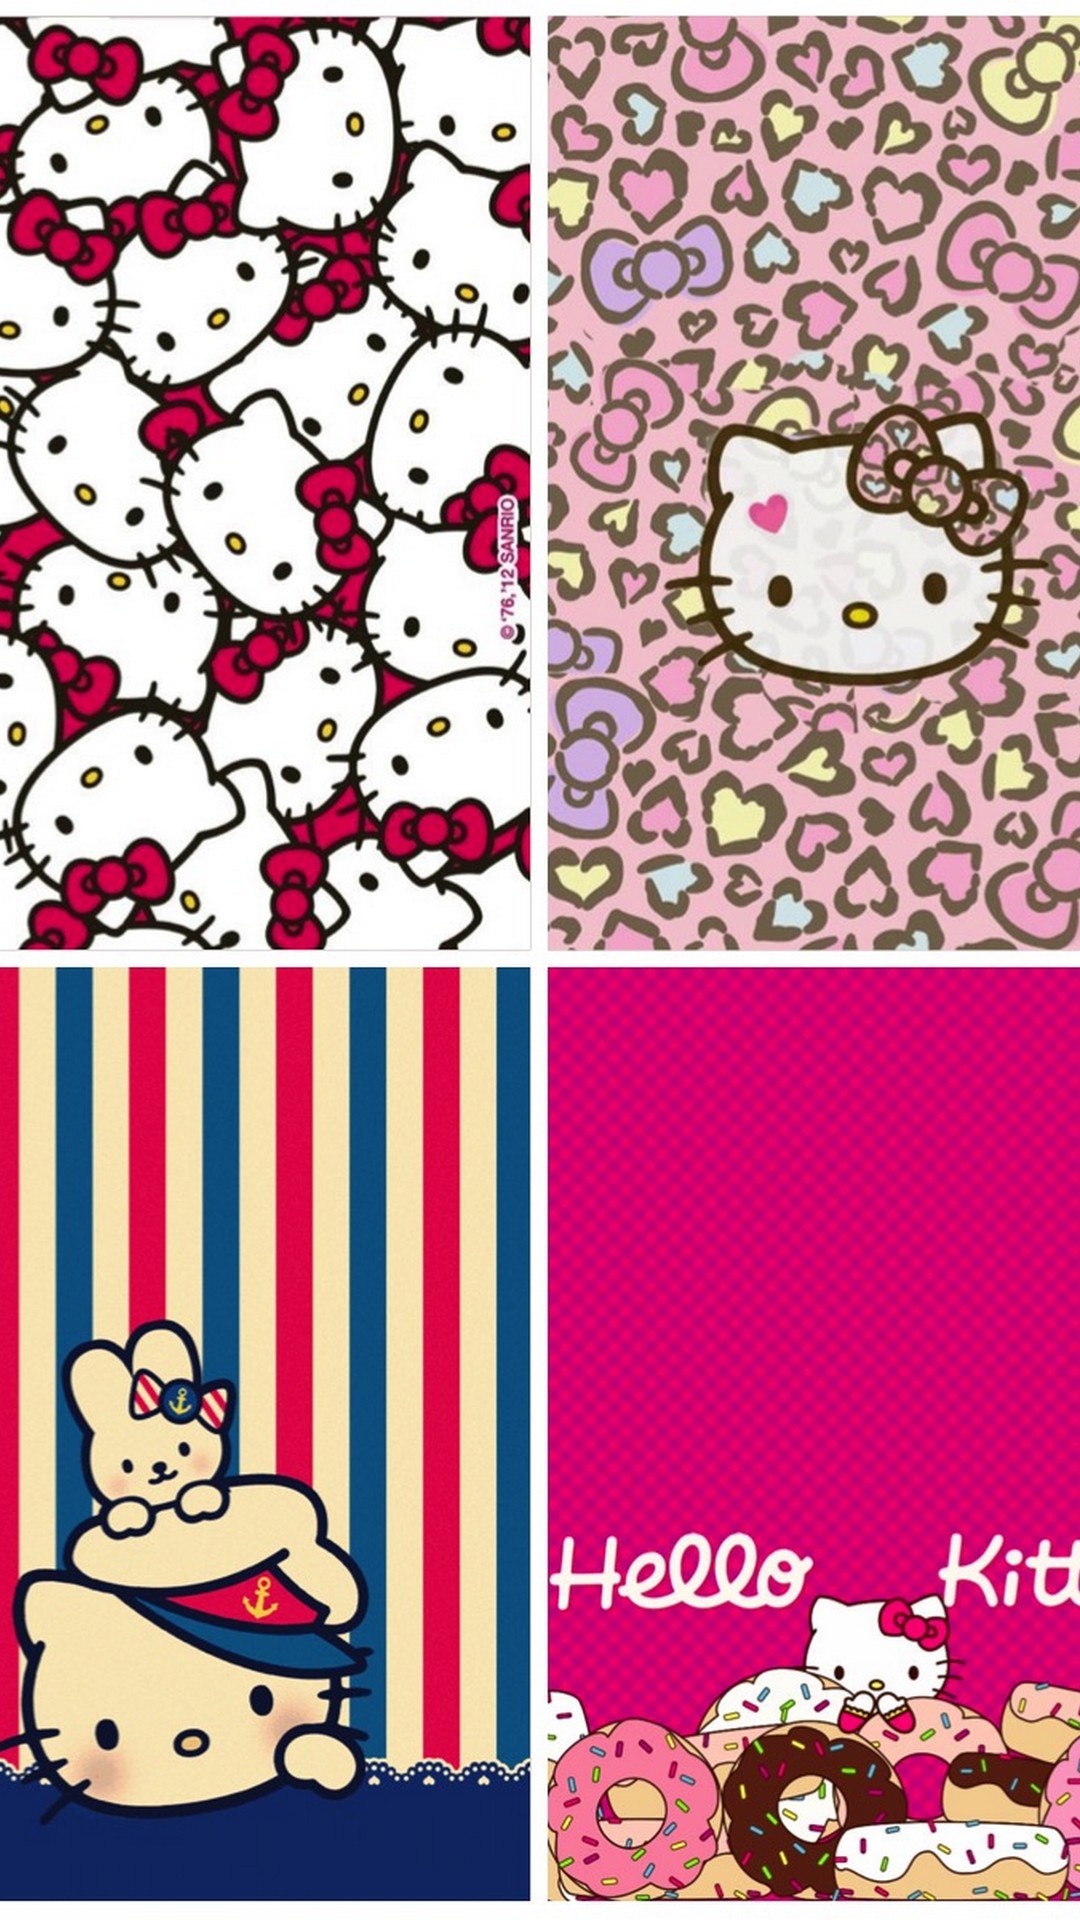 Hello Kitty Pictures iPhone 7 Plus Wallpaper with resolution 1080X1920 pixel. You can use this wallpaper as background for your desktop Computer Screensavers, Android or iPhone smartphones